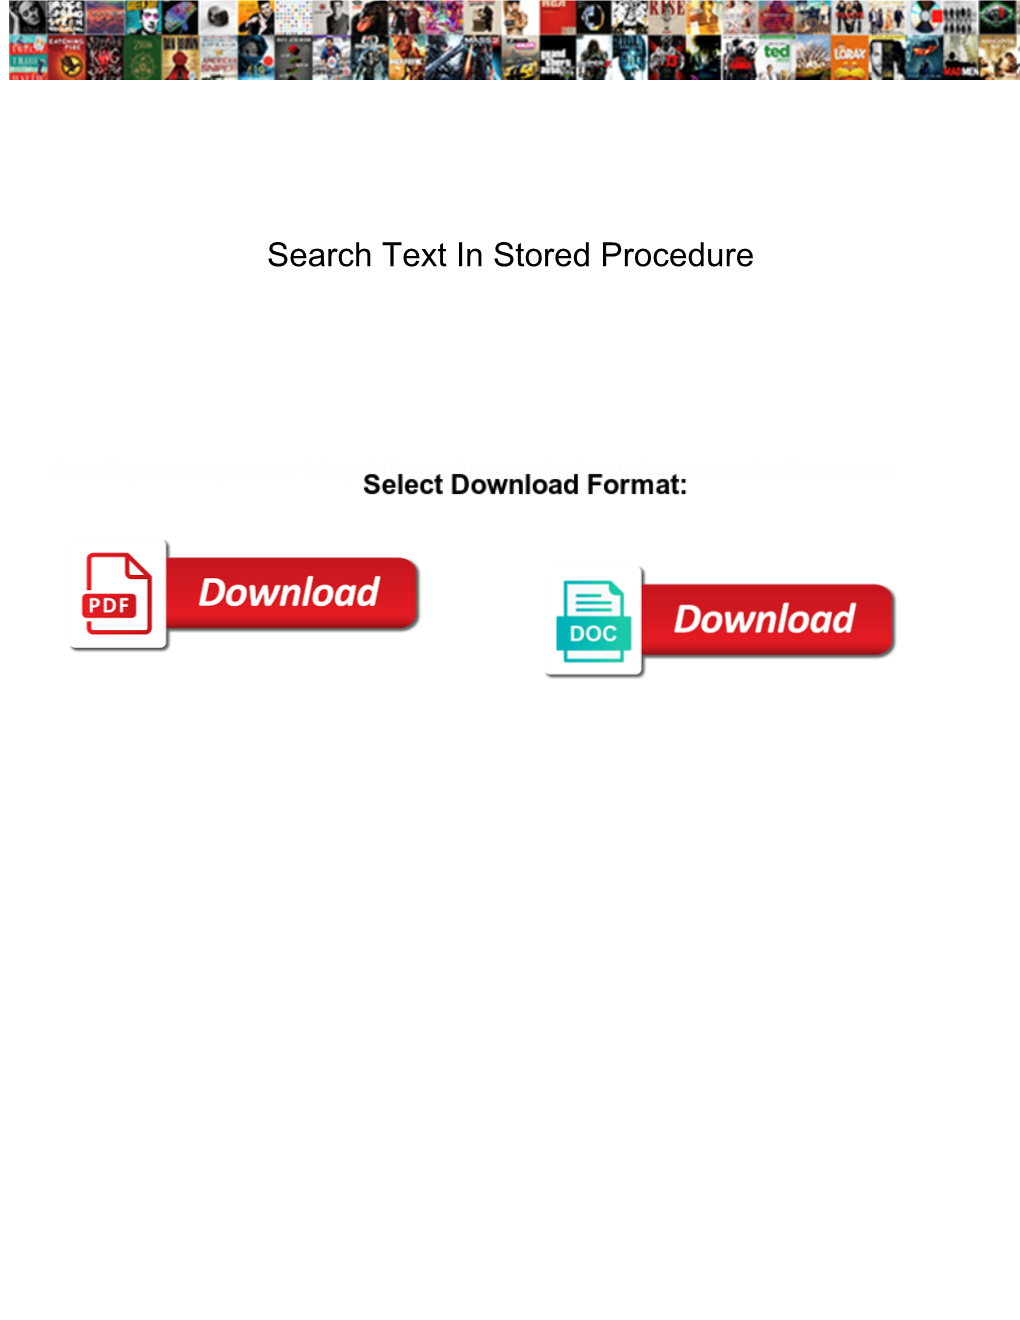 Search Text in Stored Procedure